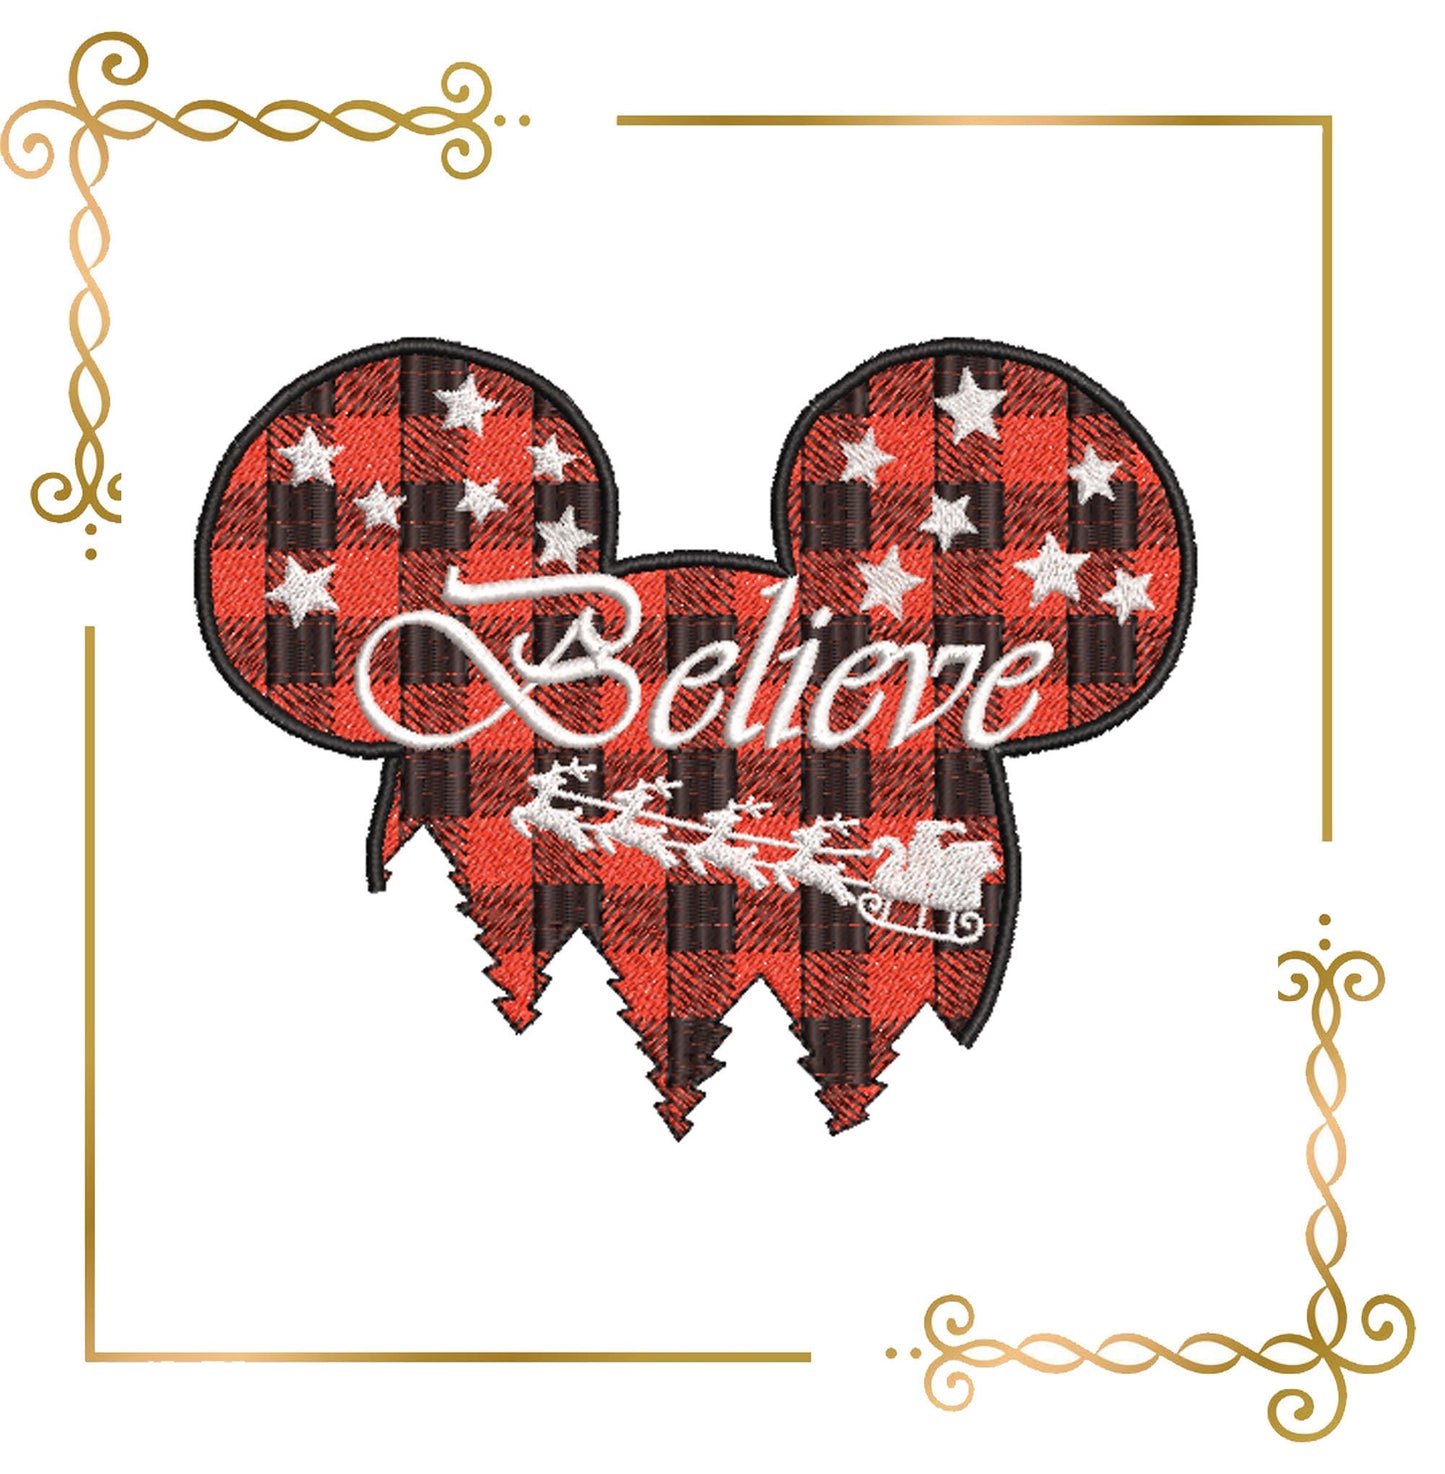 Mouse Christmas Believe Santa Claus in a sleigh 3 Sizes embroidery design to the direct download